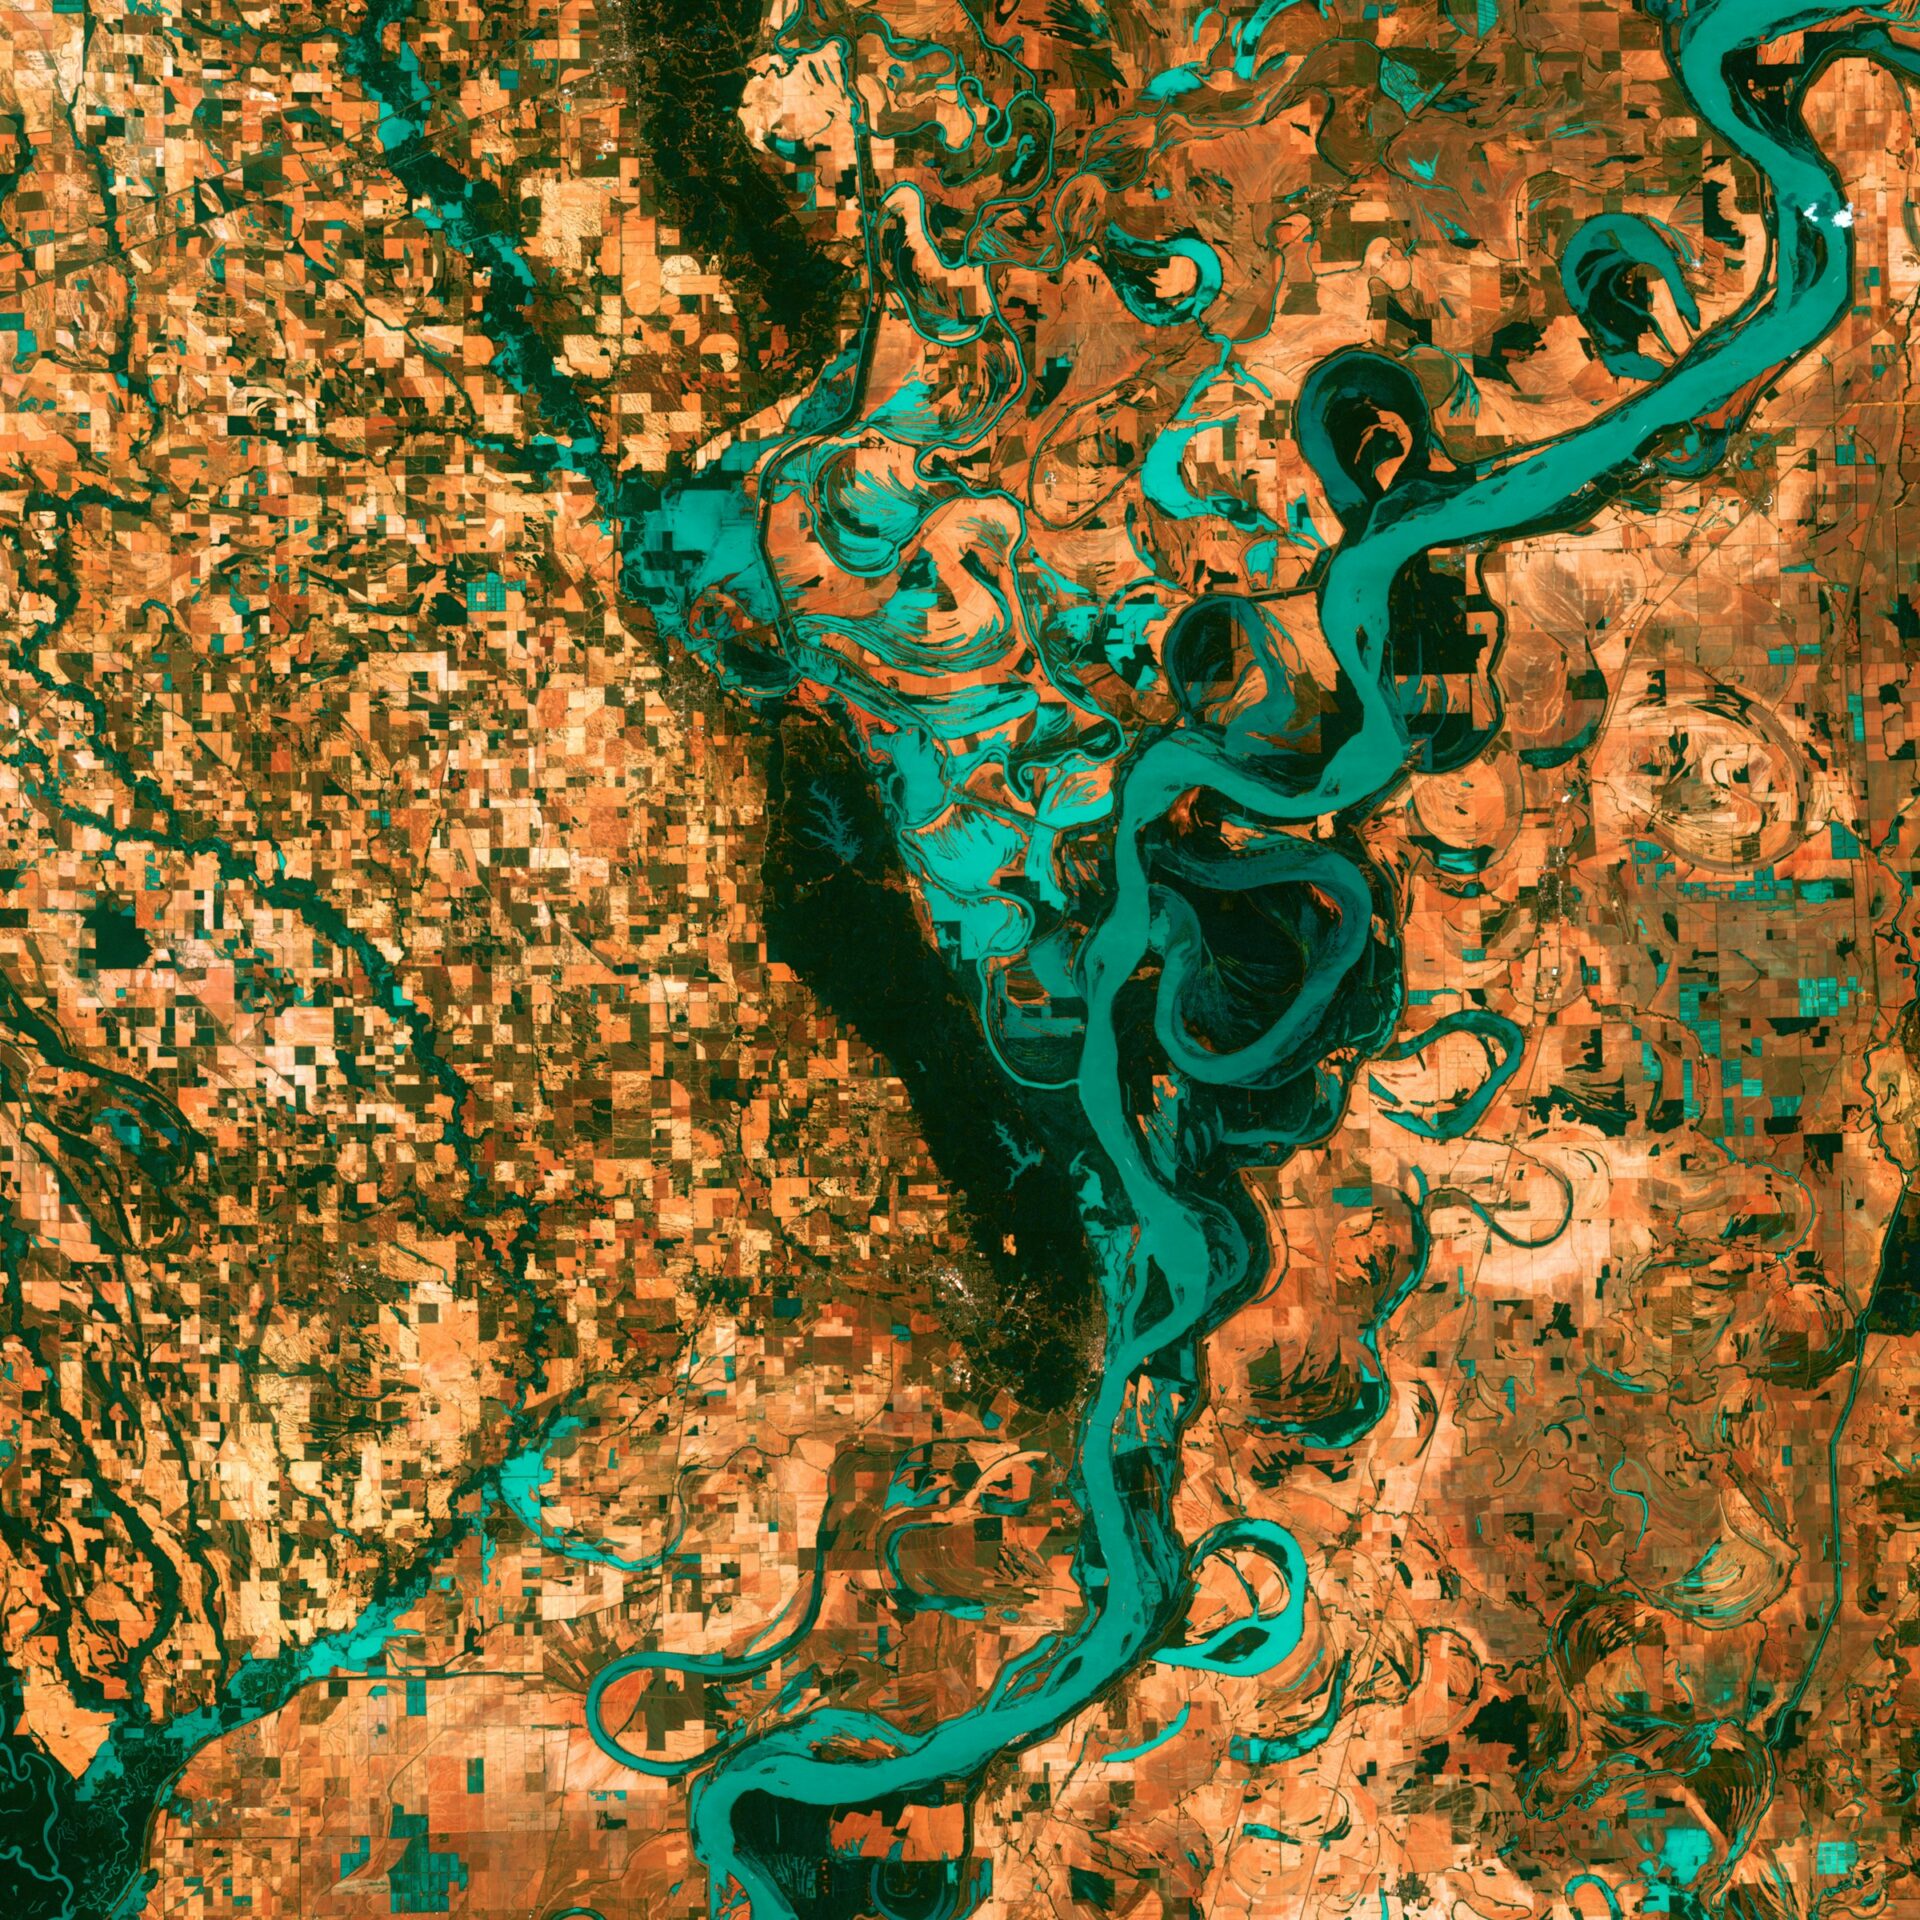 Satellite image of the Mississippi river between Tennessee and Arkansas